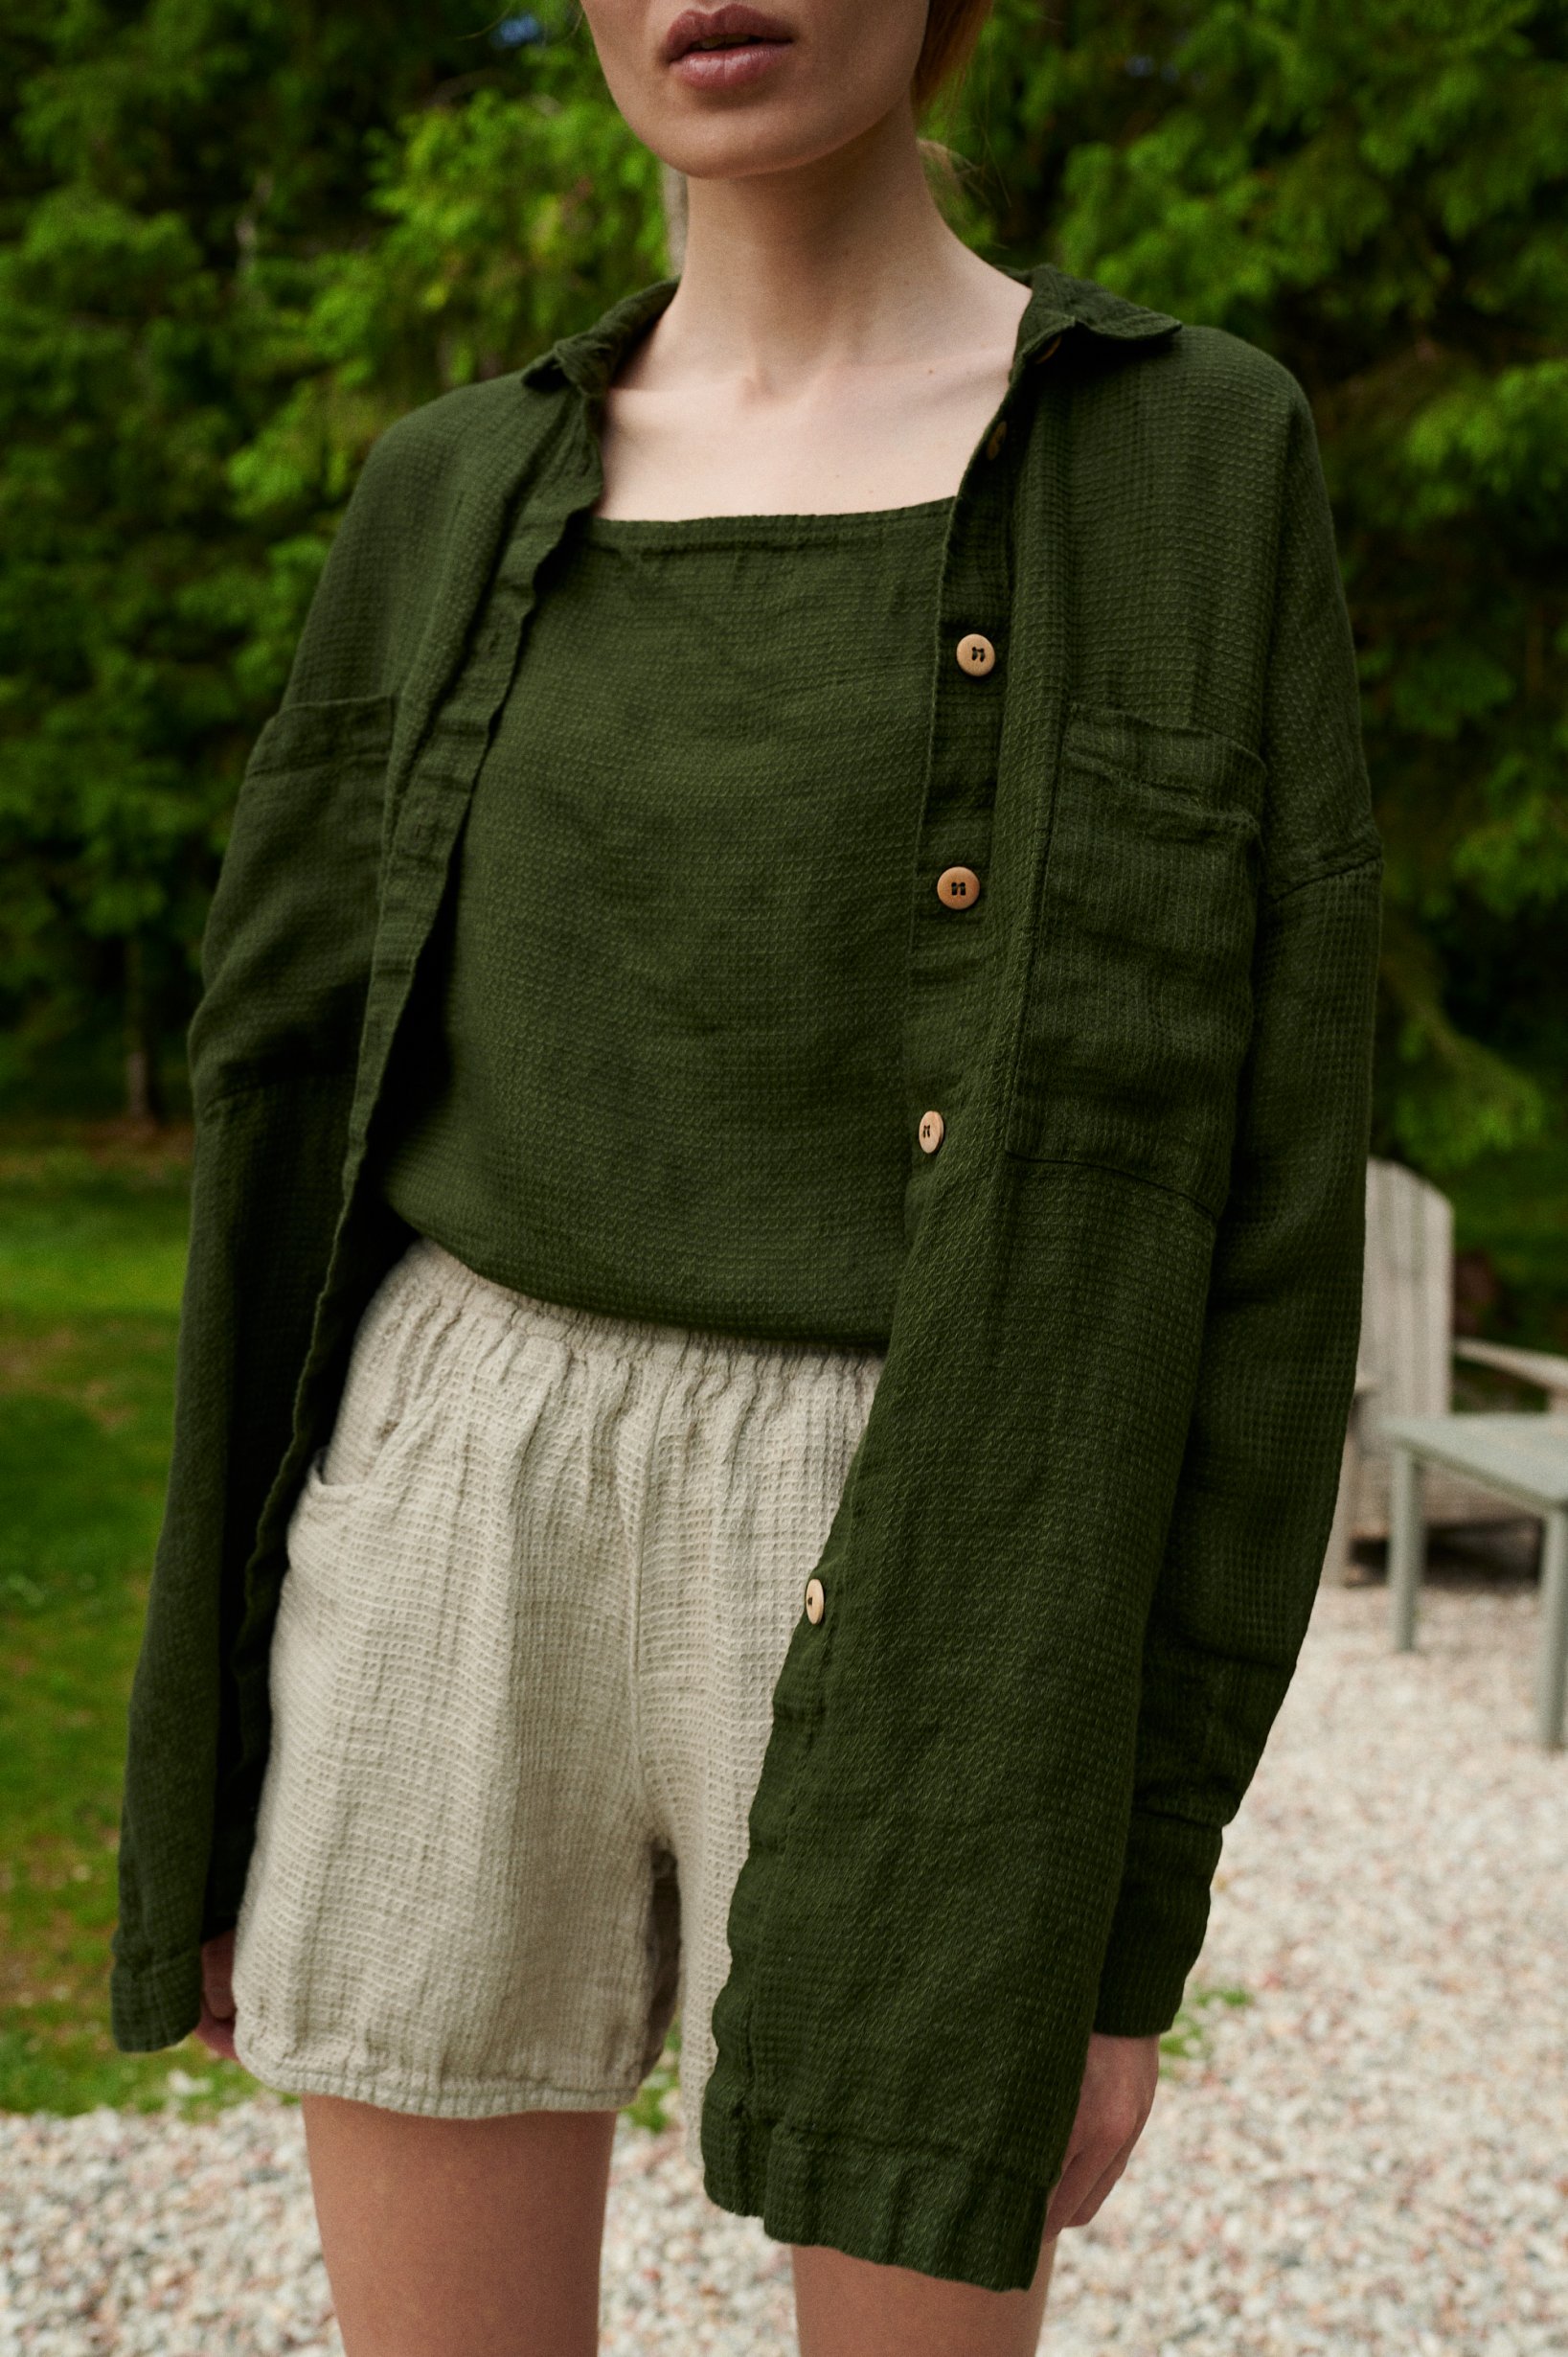 A loose-fitting waffle linen button down shirt with wooden buttons